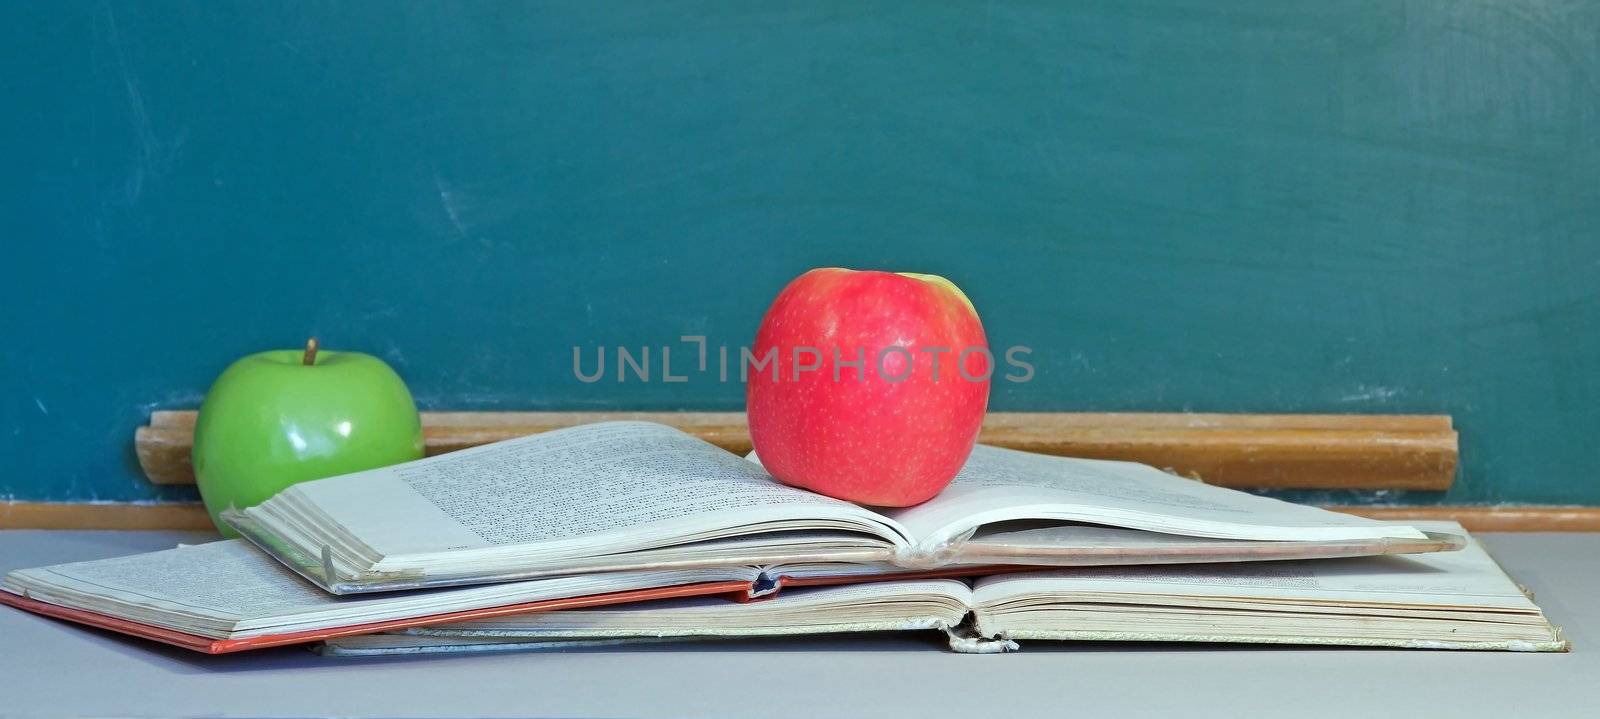 apple of knowledge, green in early education and then red at the end  metaphor